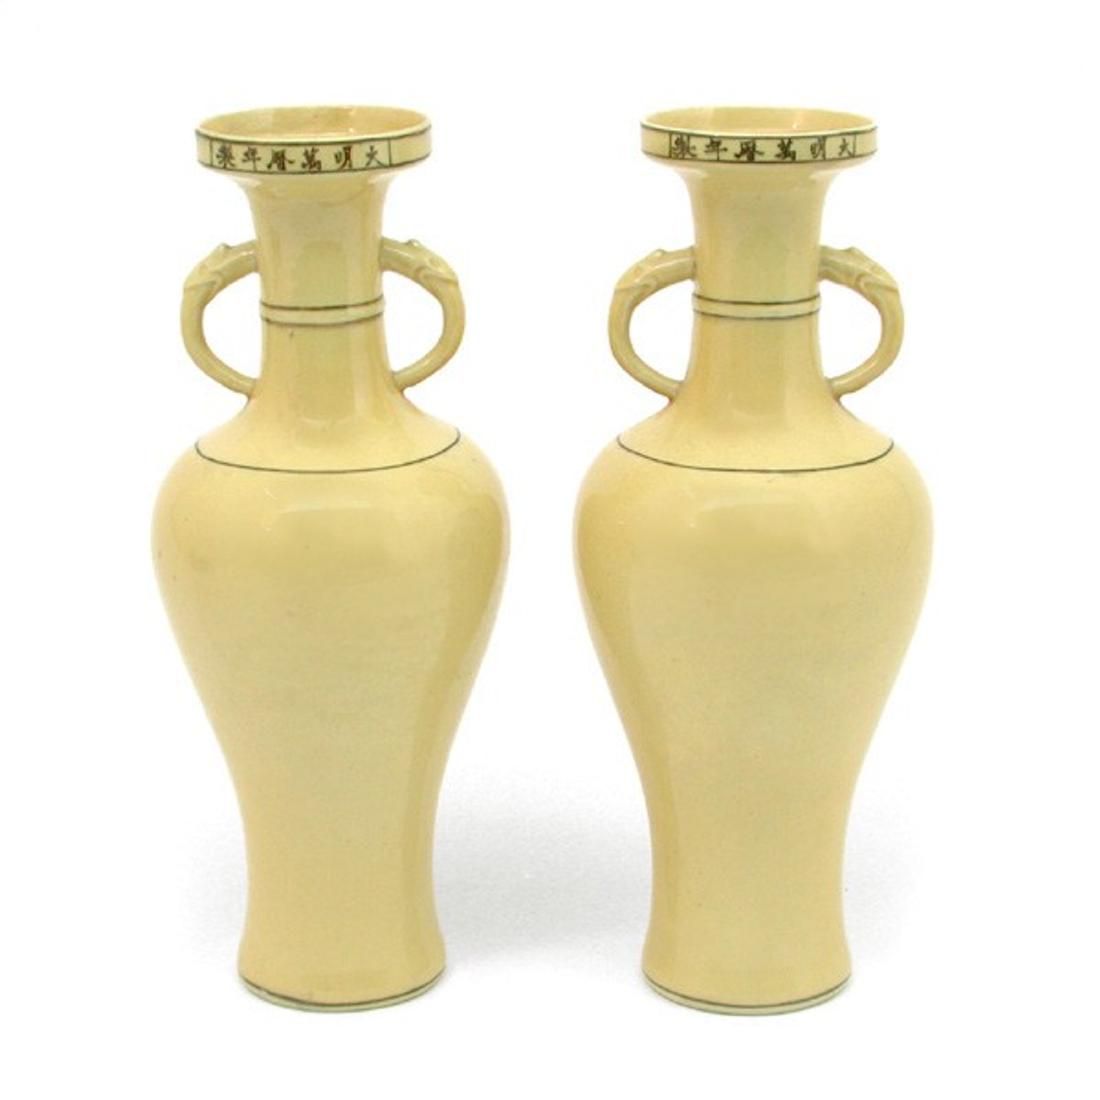 PAIR OF CHINESE YELLOW VASES 18TH 3d15b5